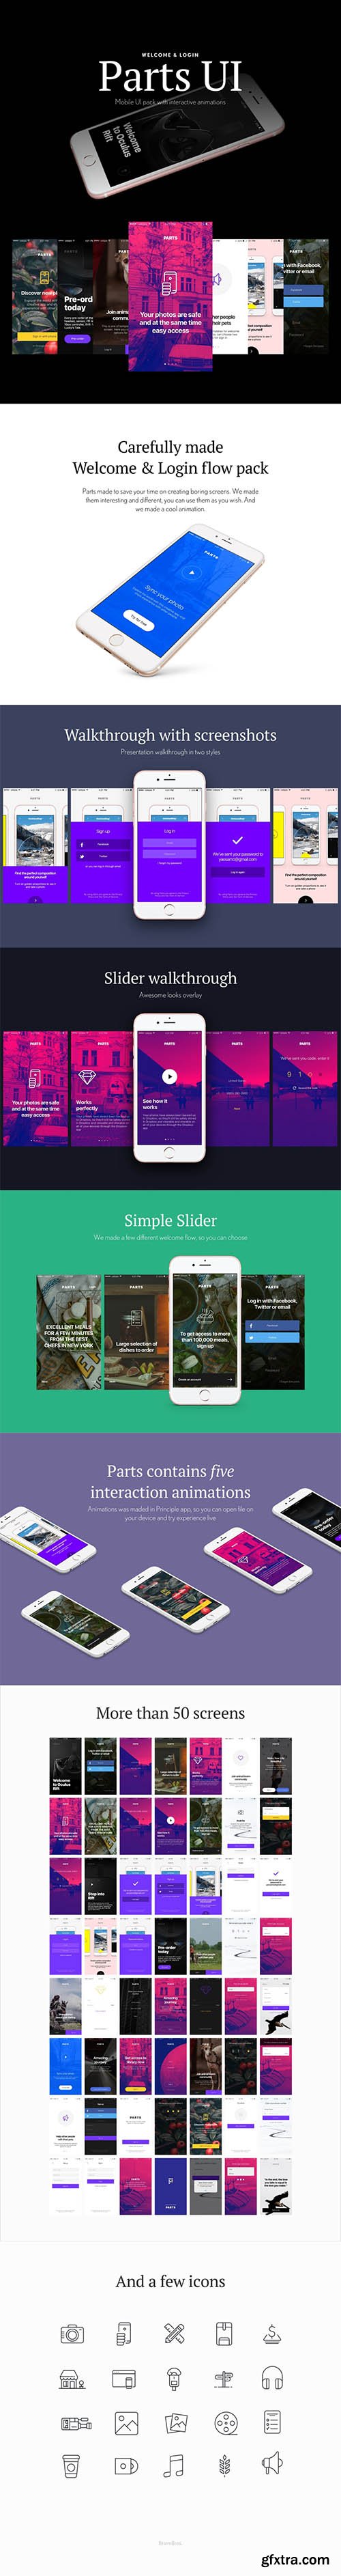 Parts UI Mobile Kit - Mobile UI kit with interaction animations